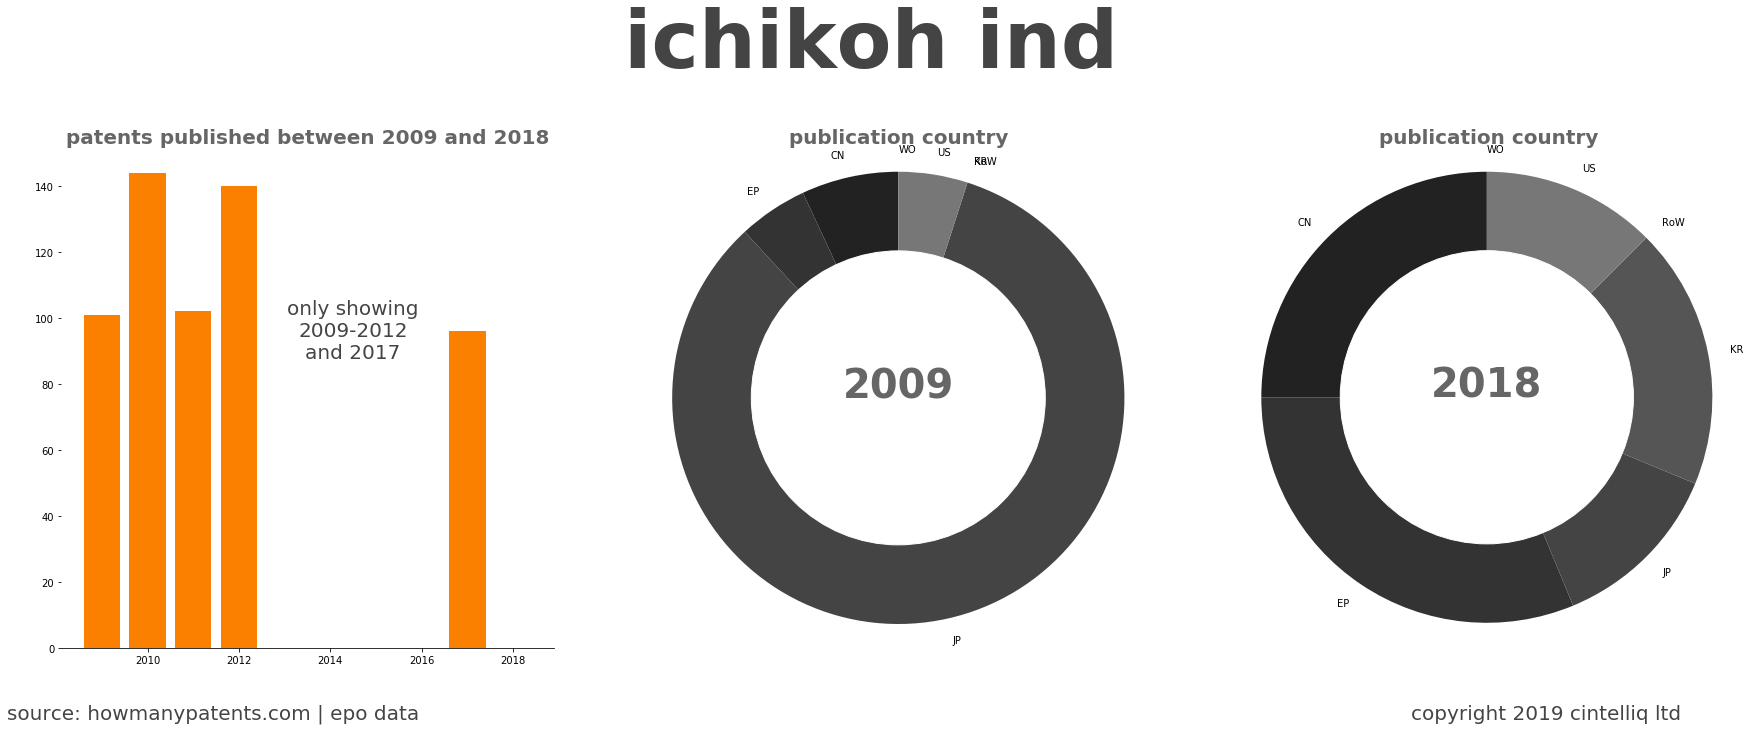 summary of patents for Ichikoh Ind